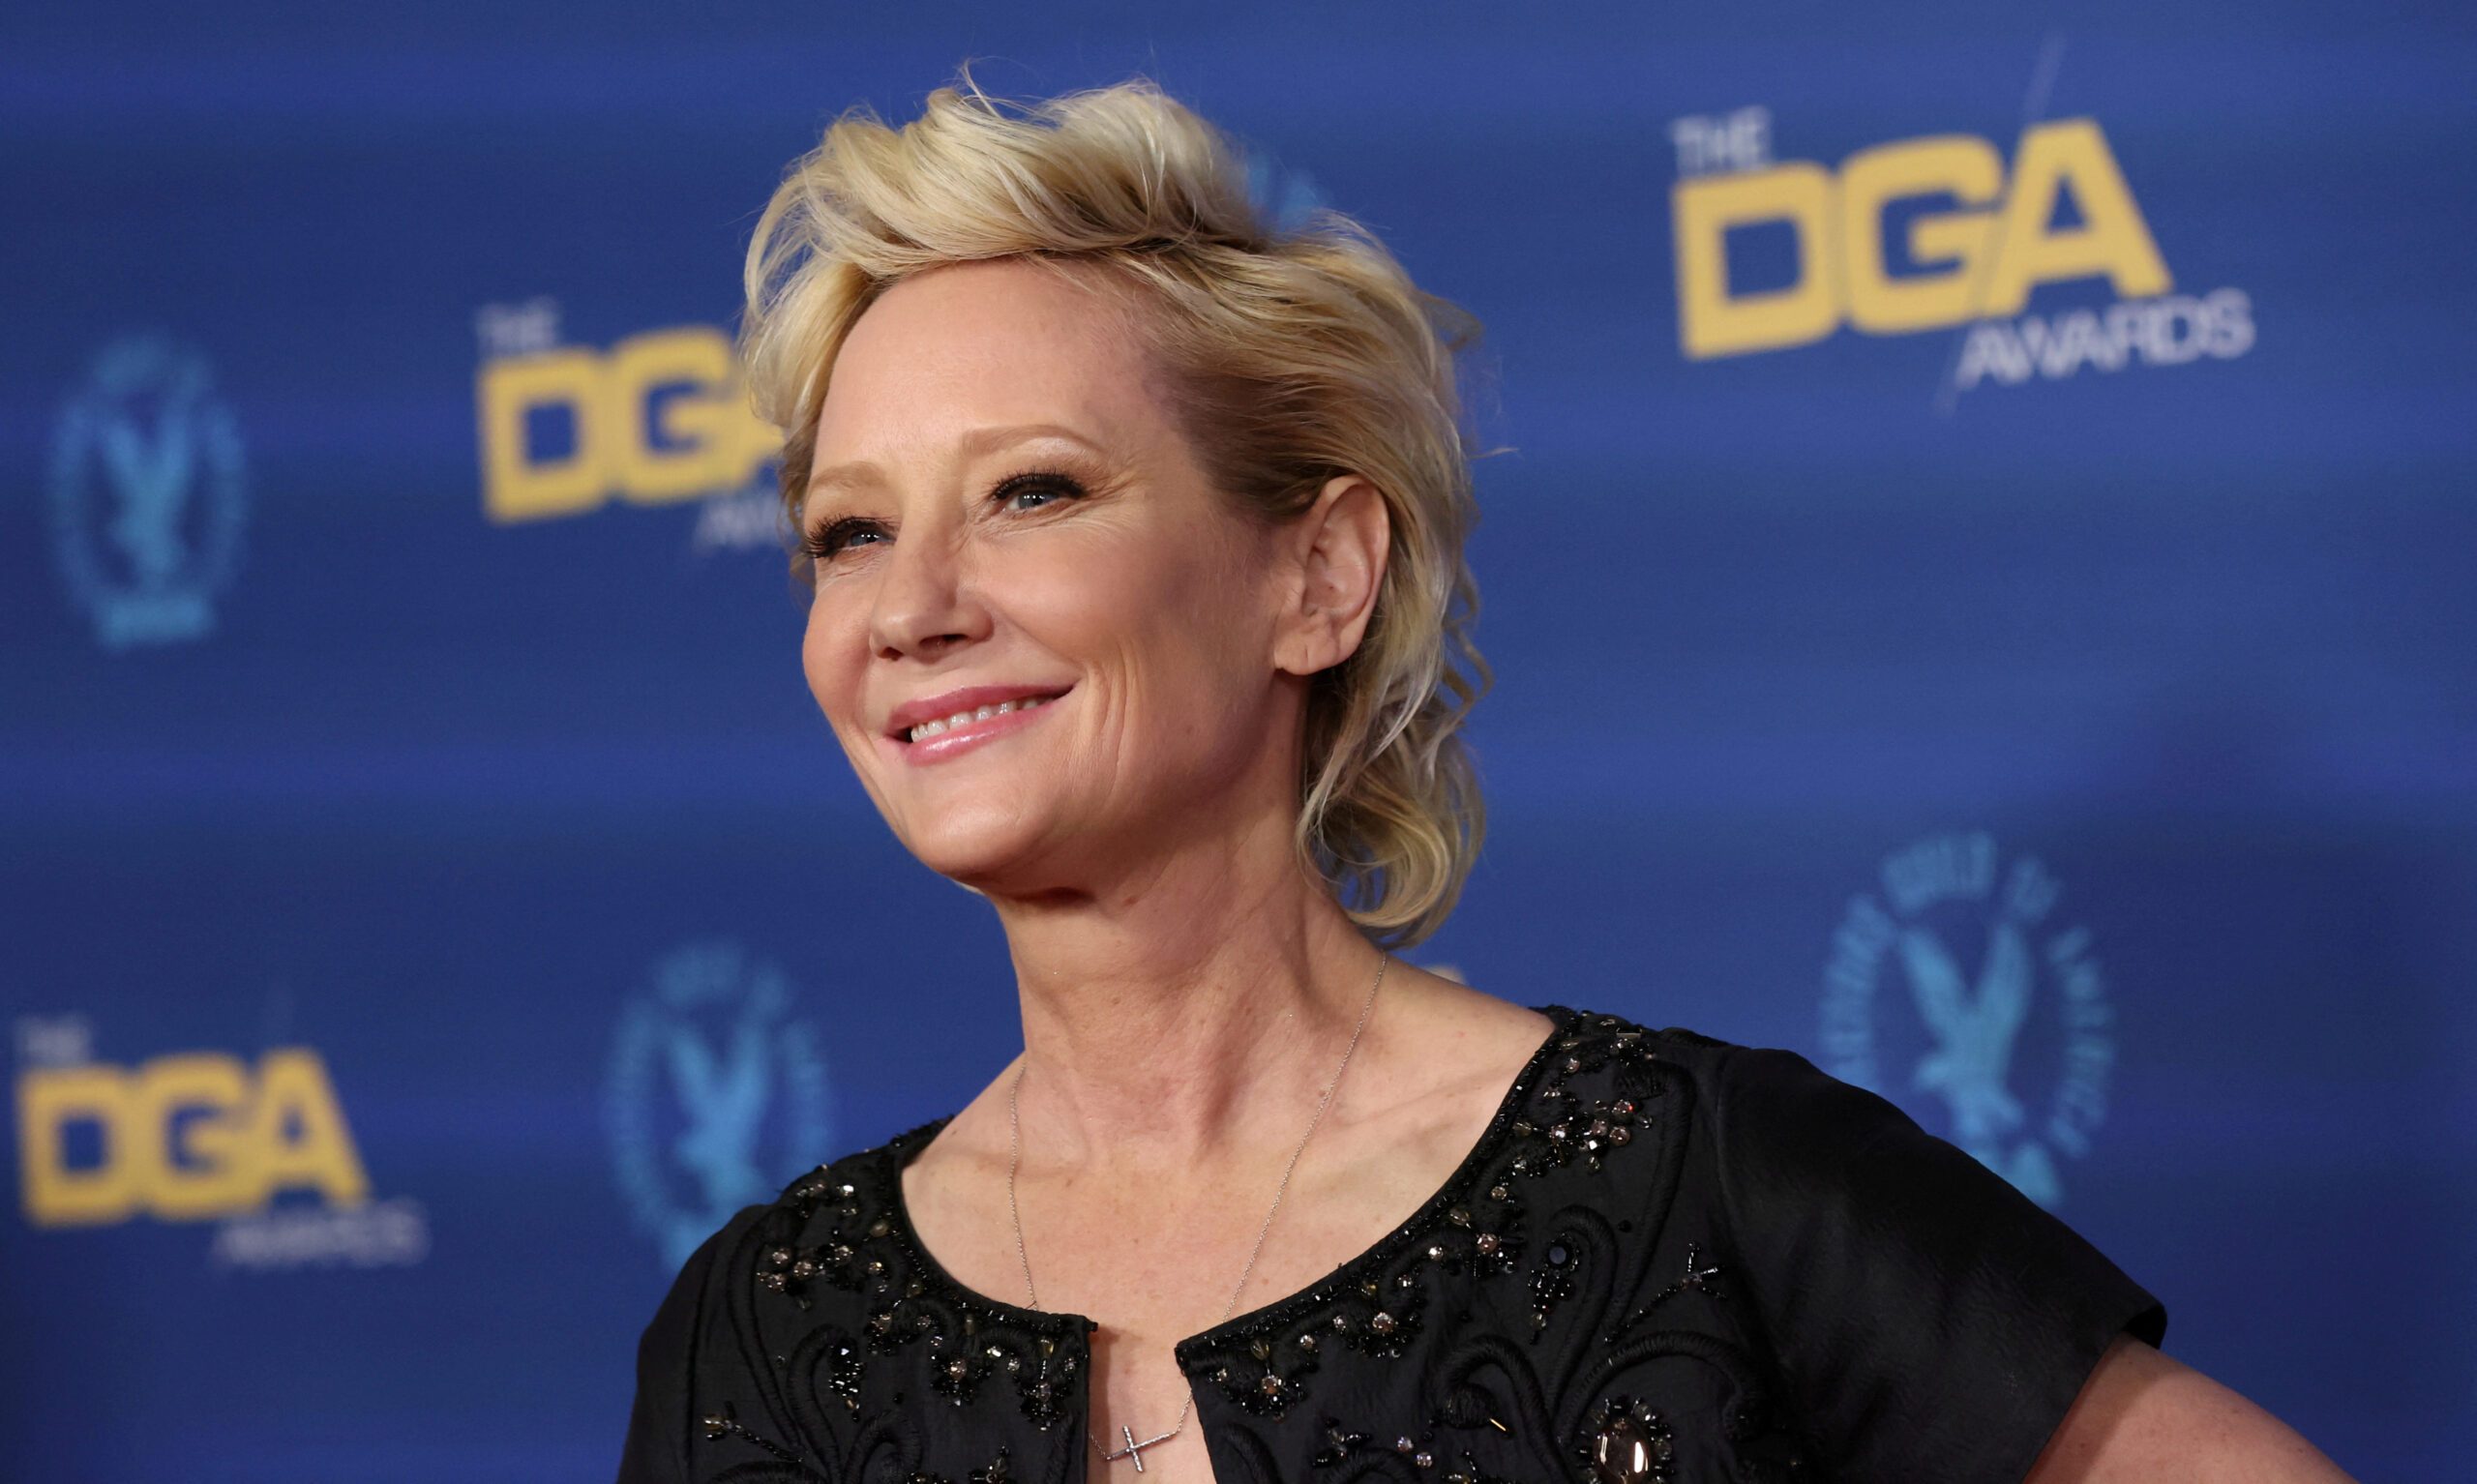 Anne Heche taken off life support 9 days after car crash